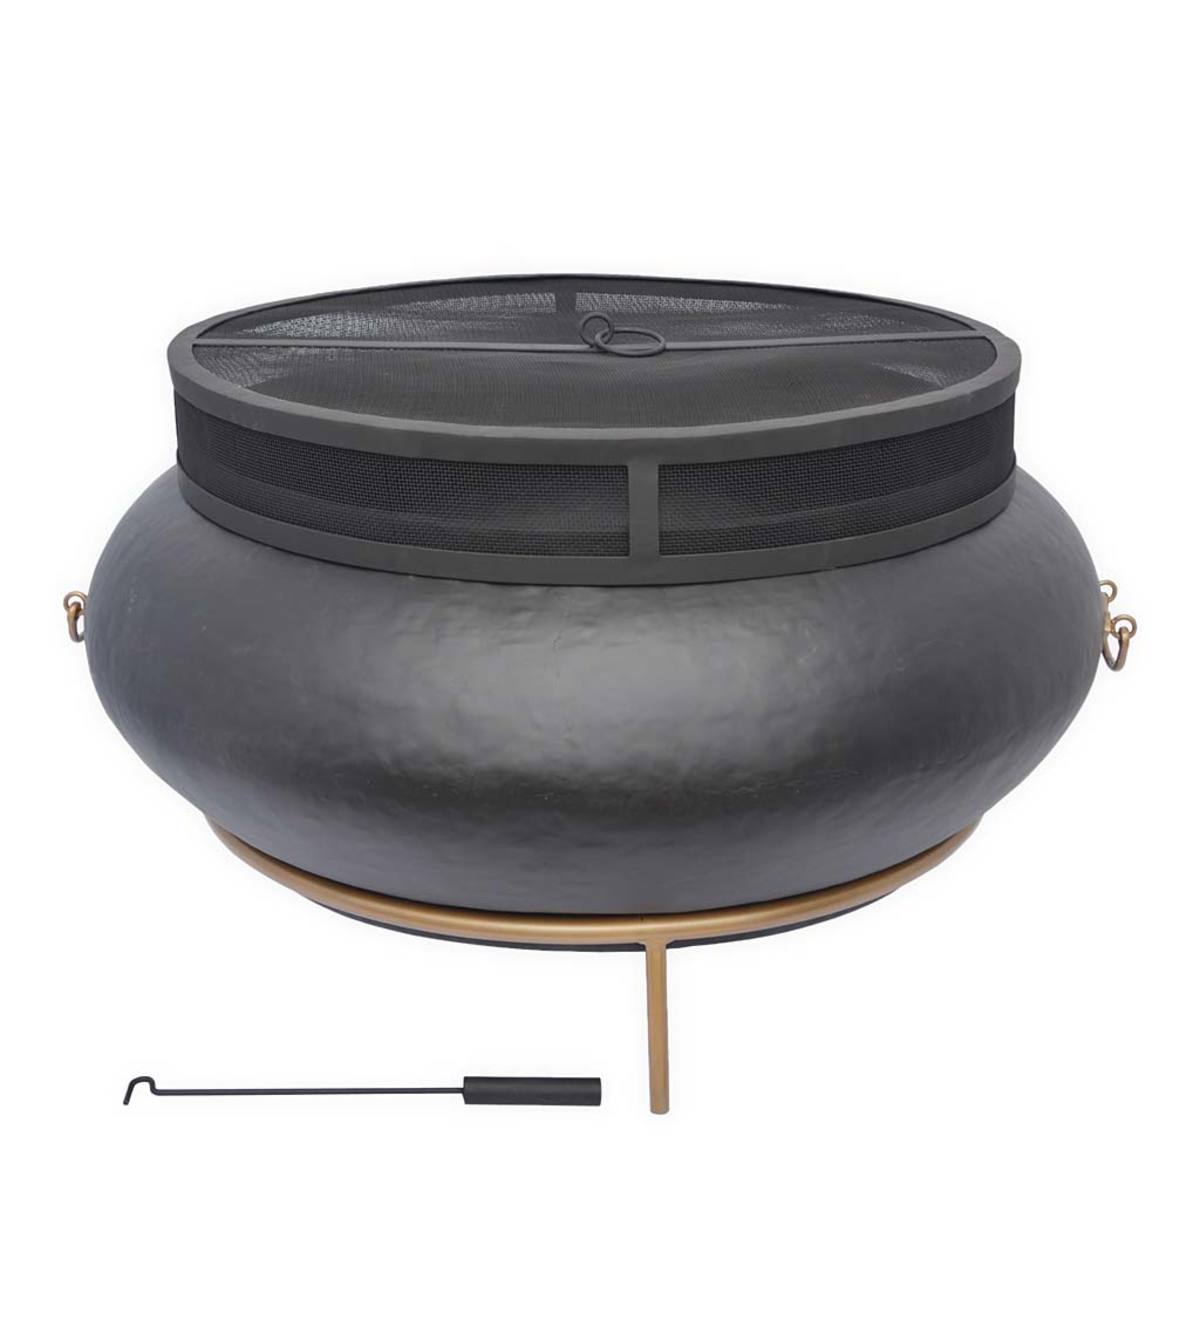 Cast Iron Fire Pit with Fitted Mesh Spark Guard and Stand